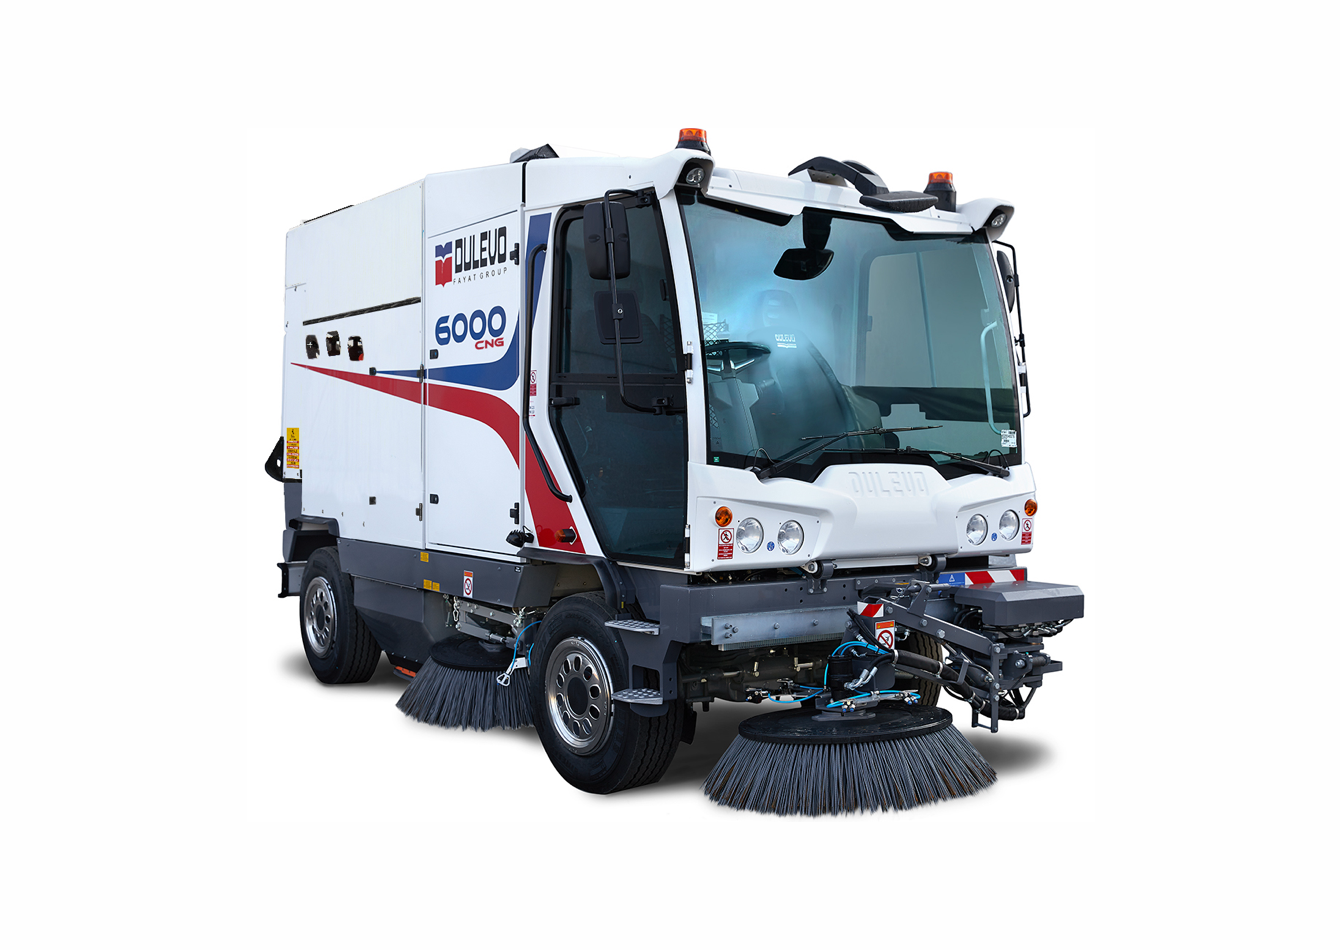 6000 Cng Street Sweepers